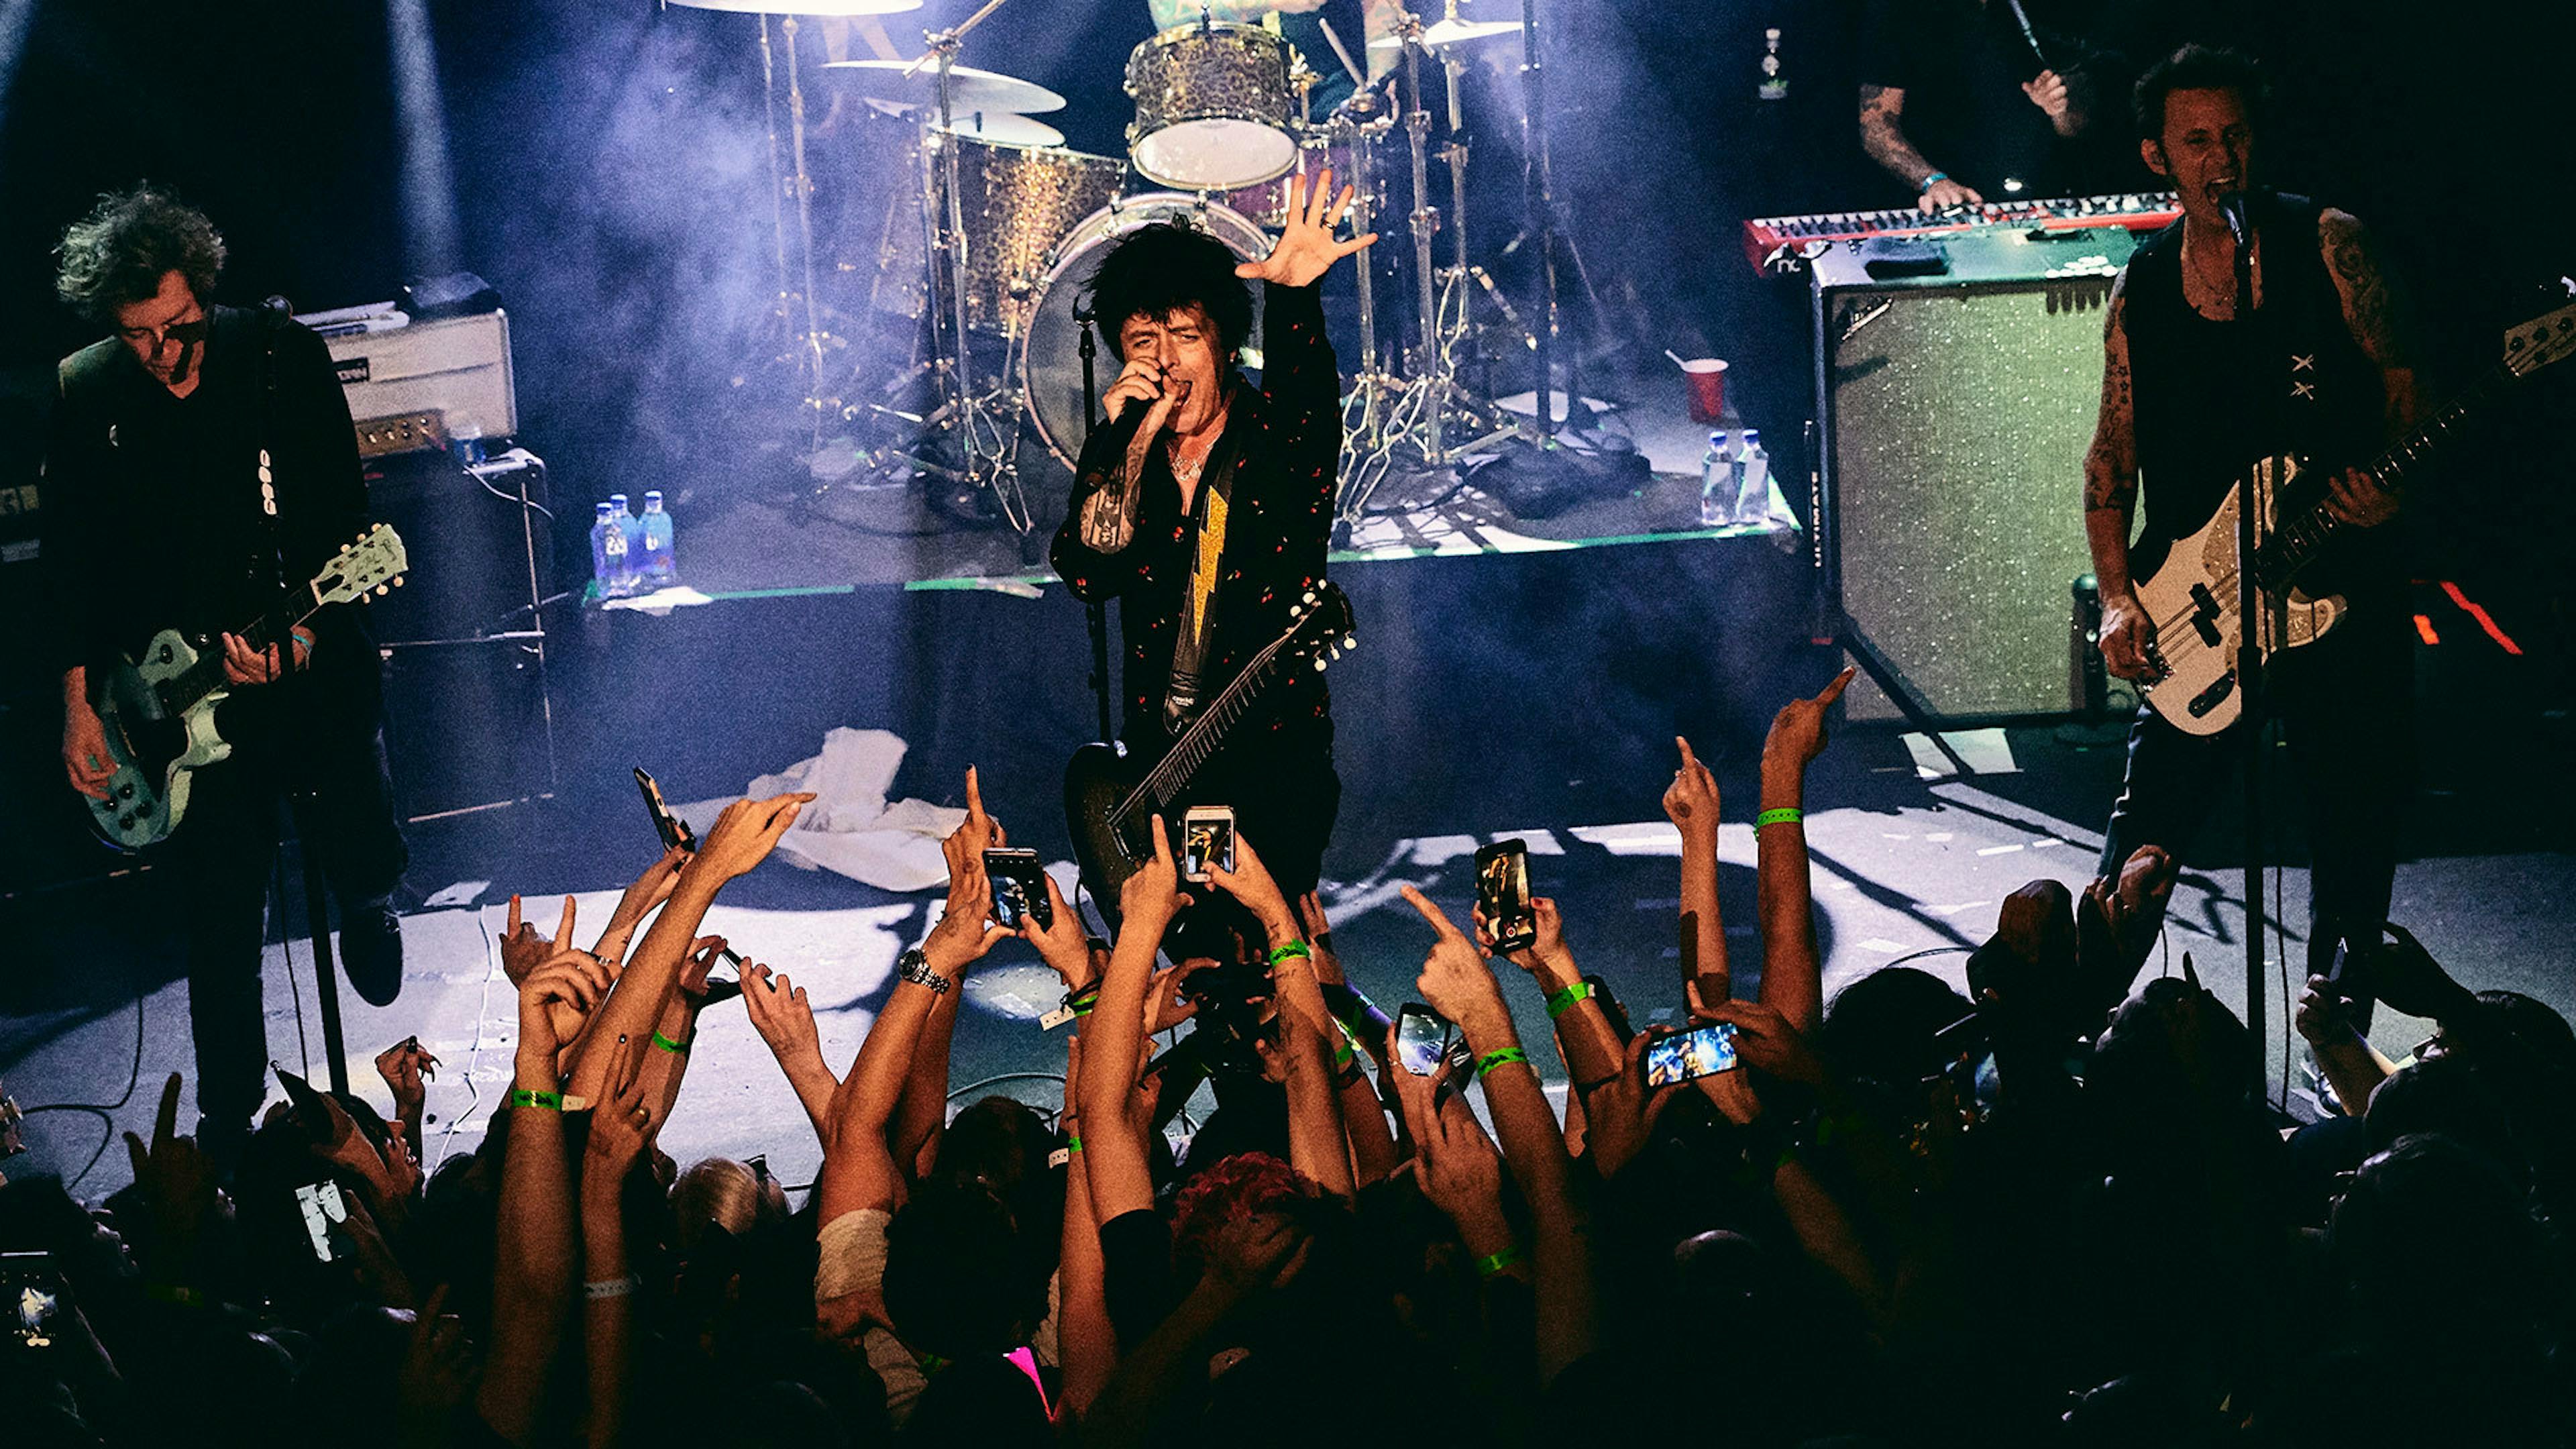 In Pictures: Green Day, Fall Out Boy And Weezer's Secret Show In Los Angeles